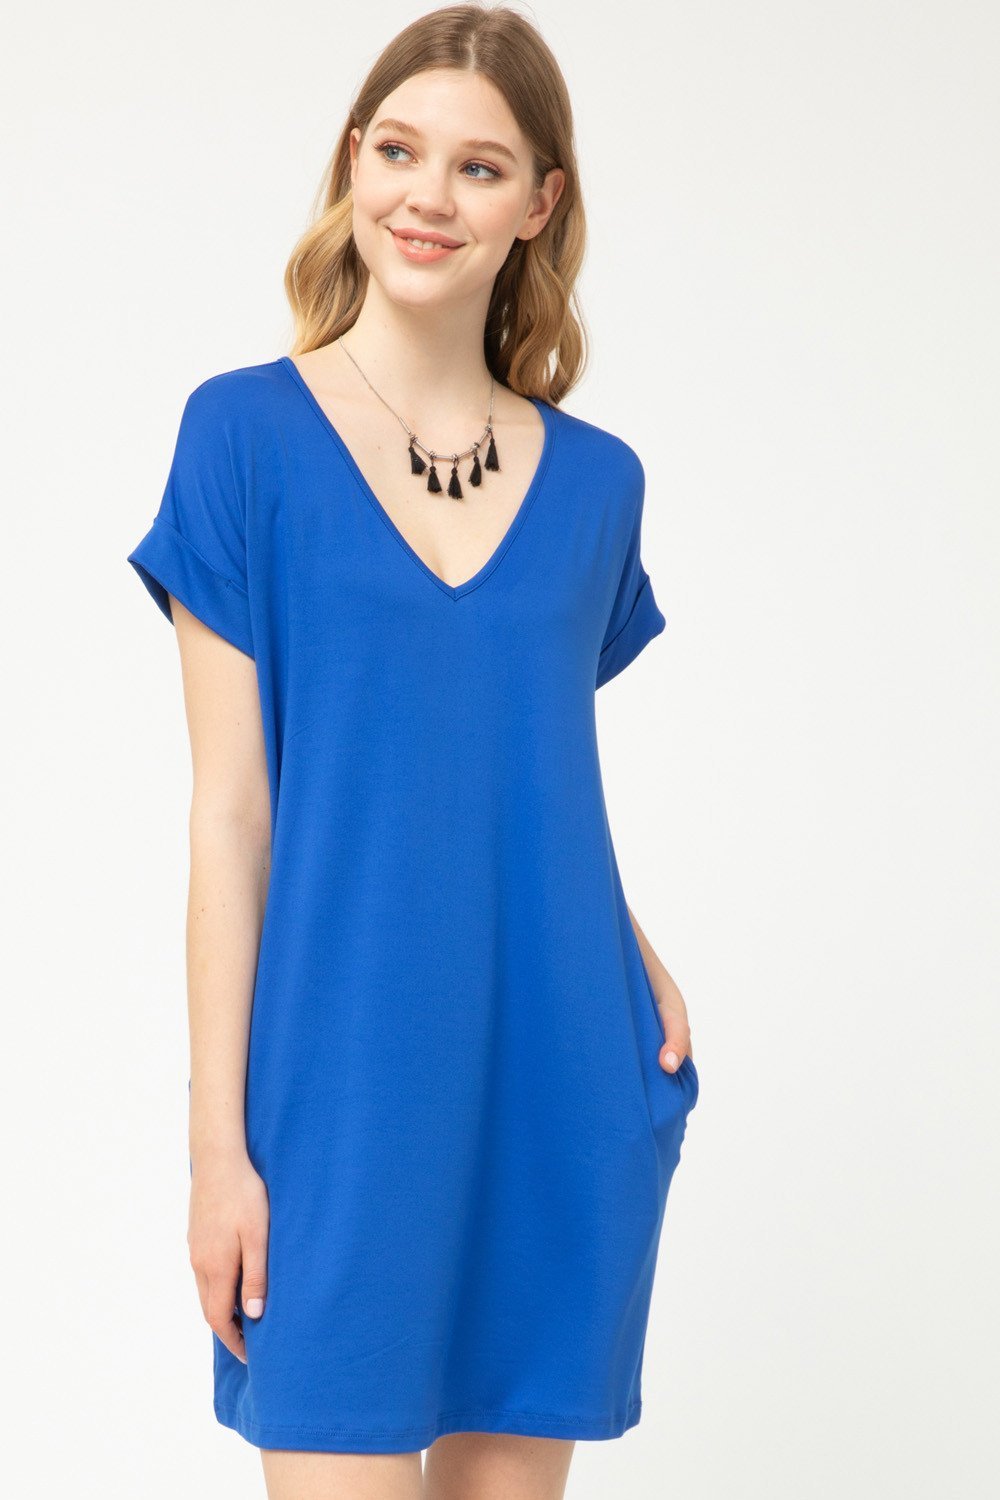 Cuffed Sleeve V-Neck T-Shirt Dress with Pockets by Entro